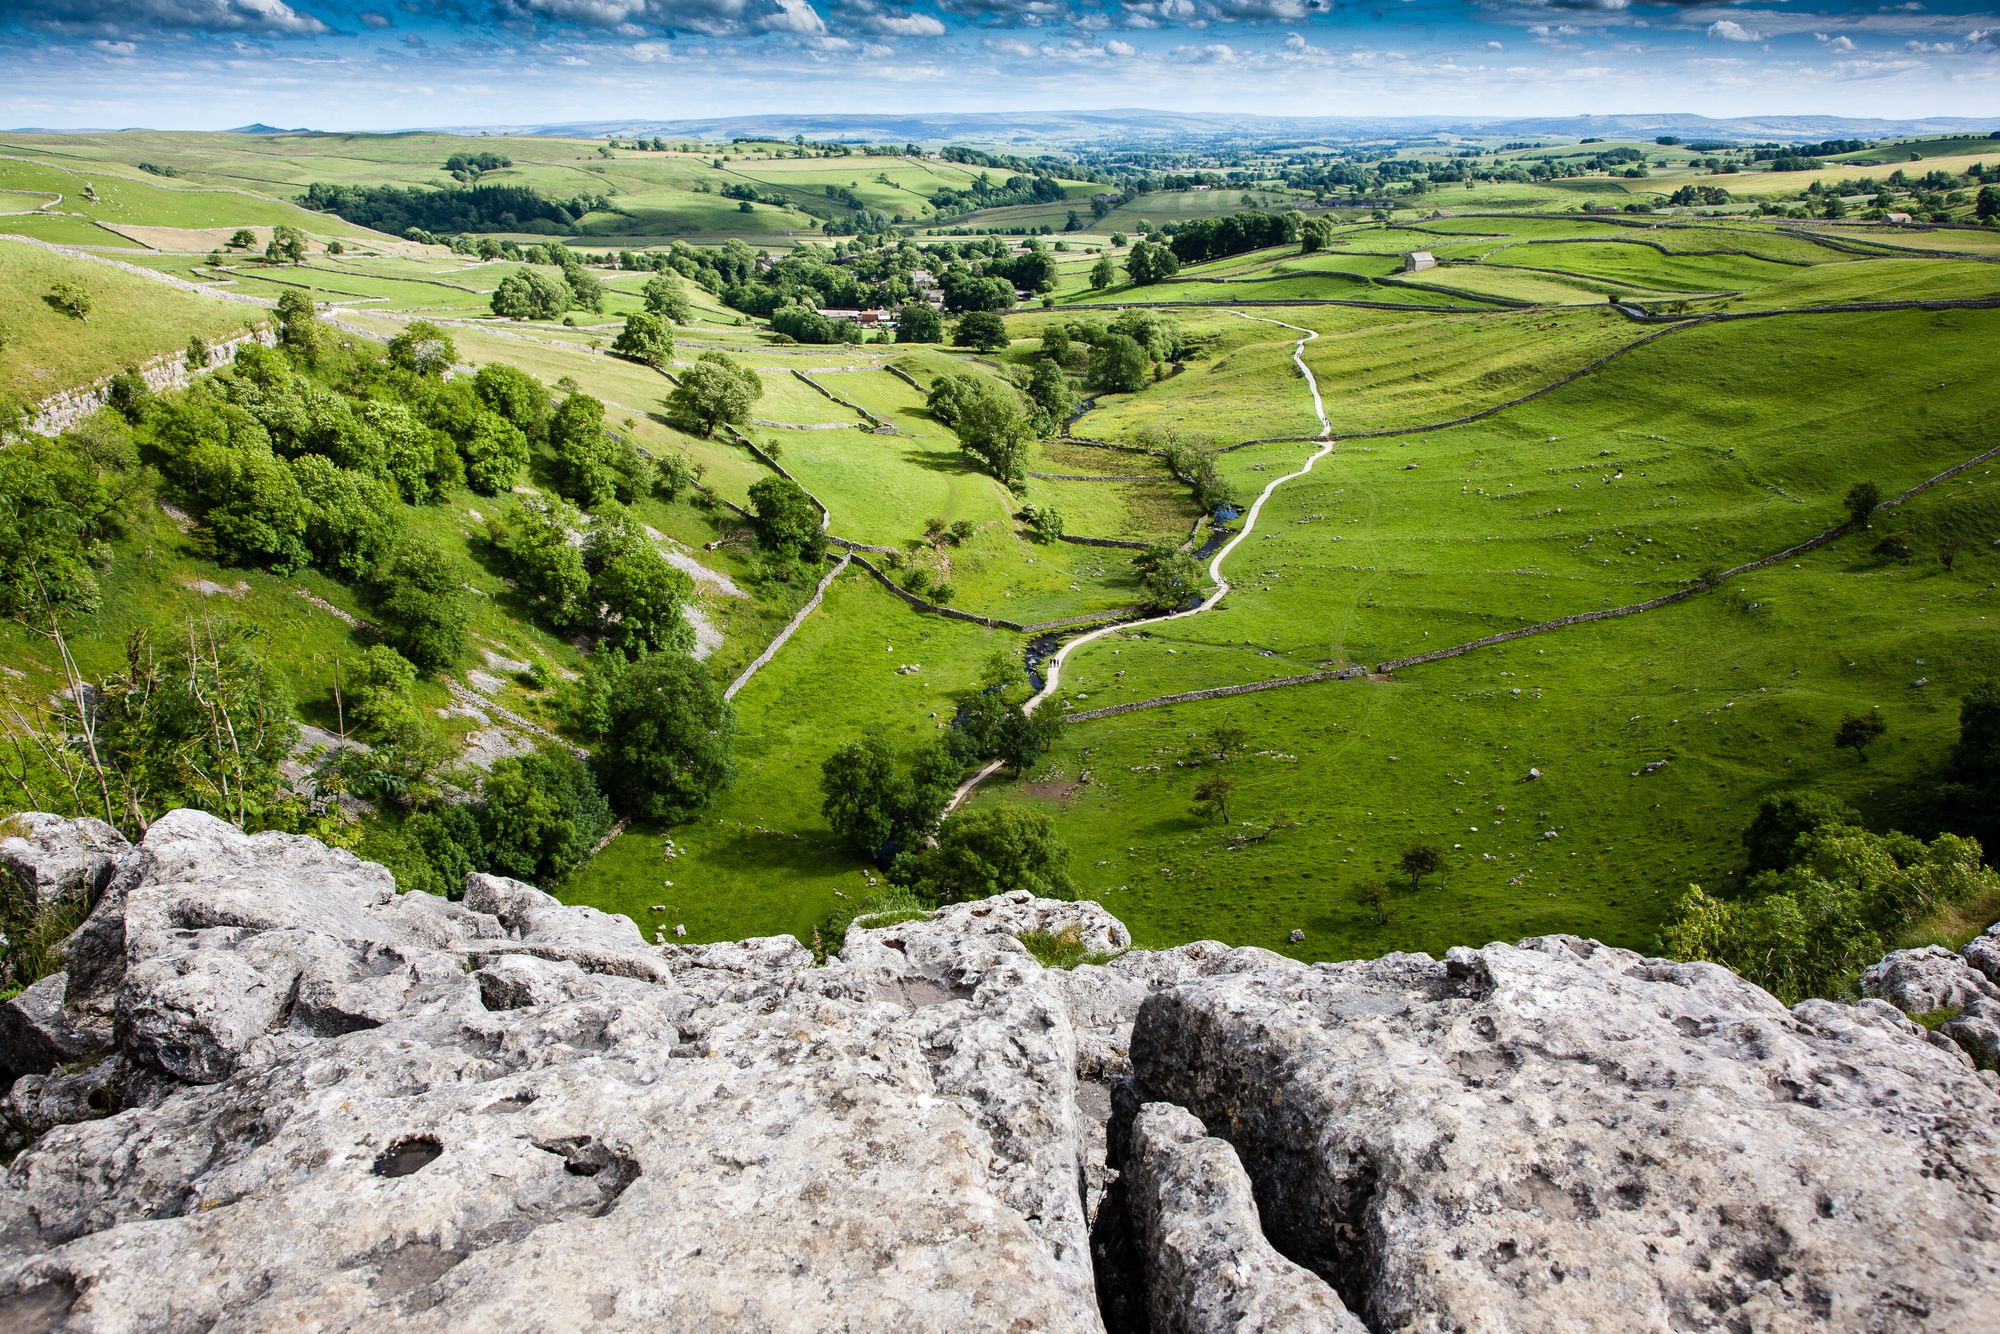 View from the top of Malham Cove showing lush green fields stretched to the horizon